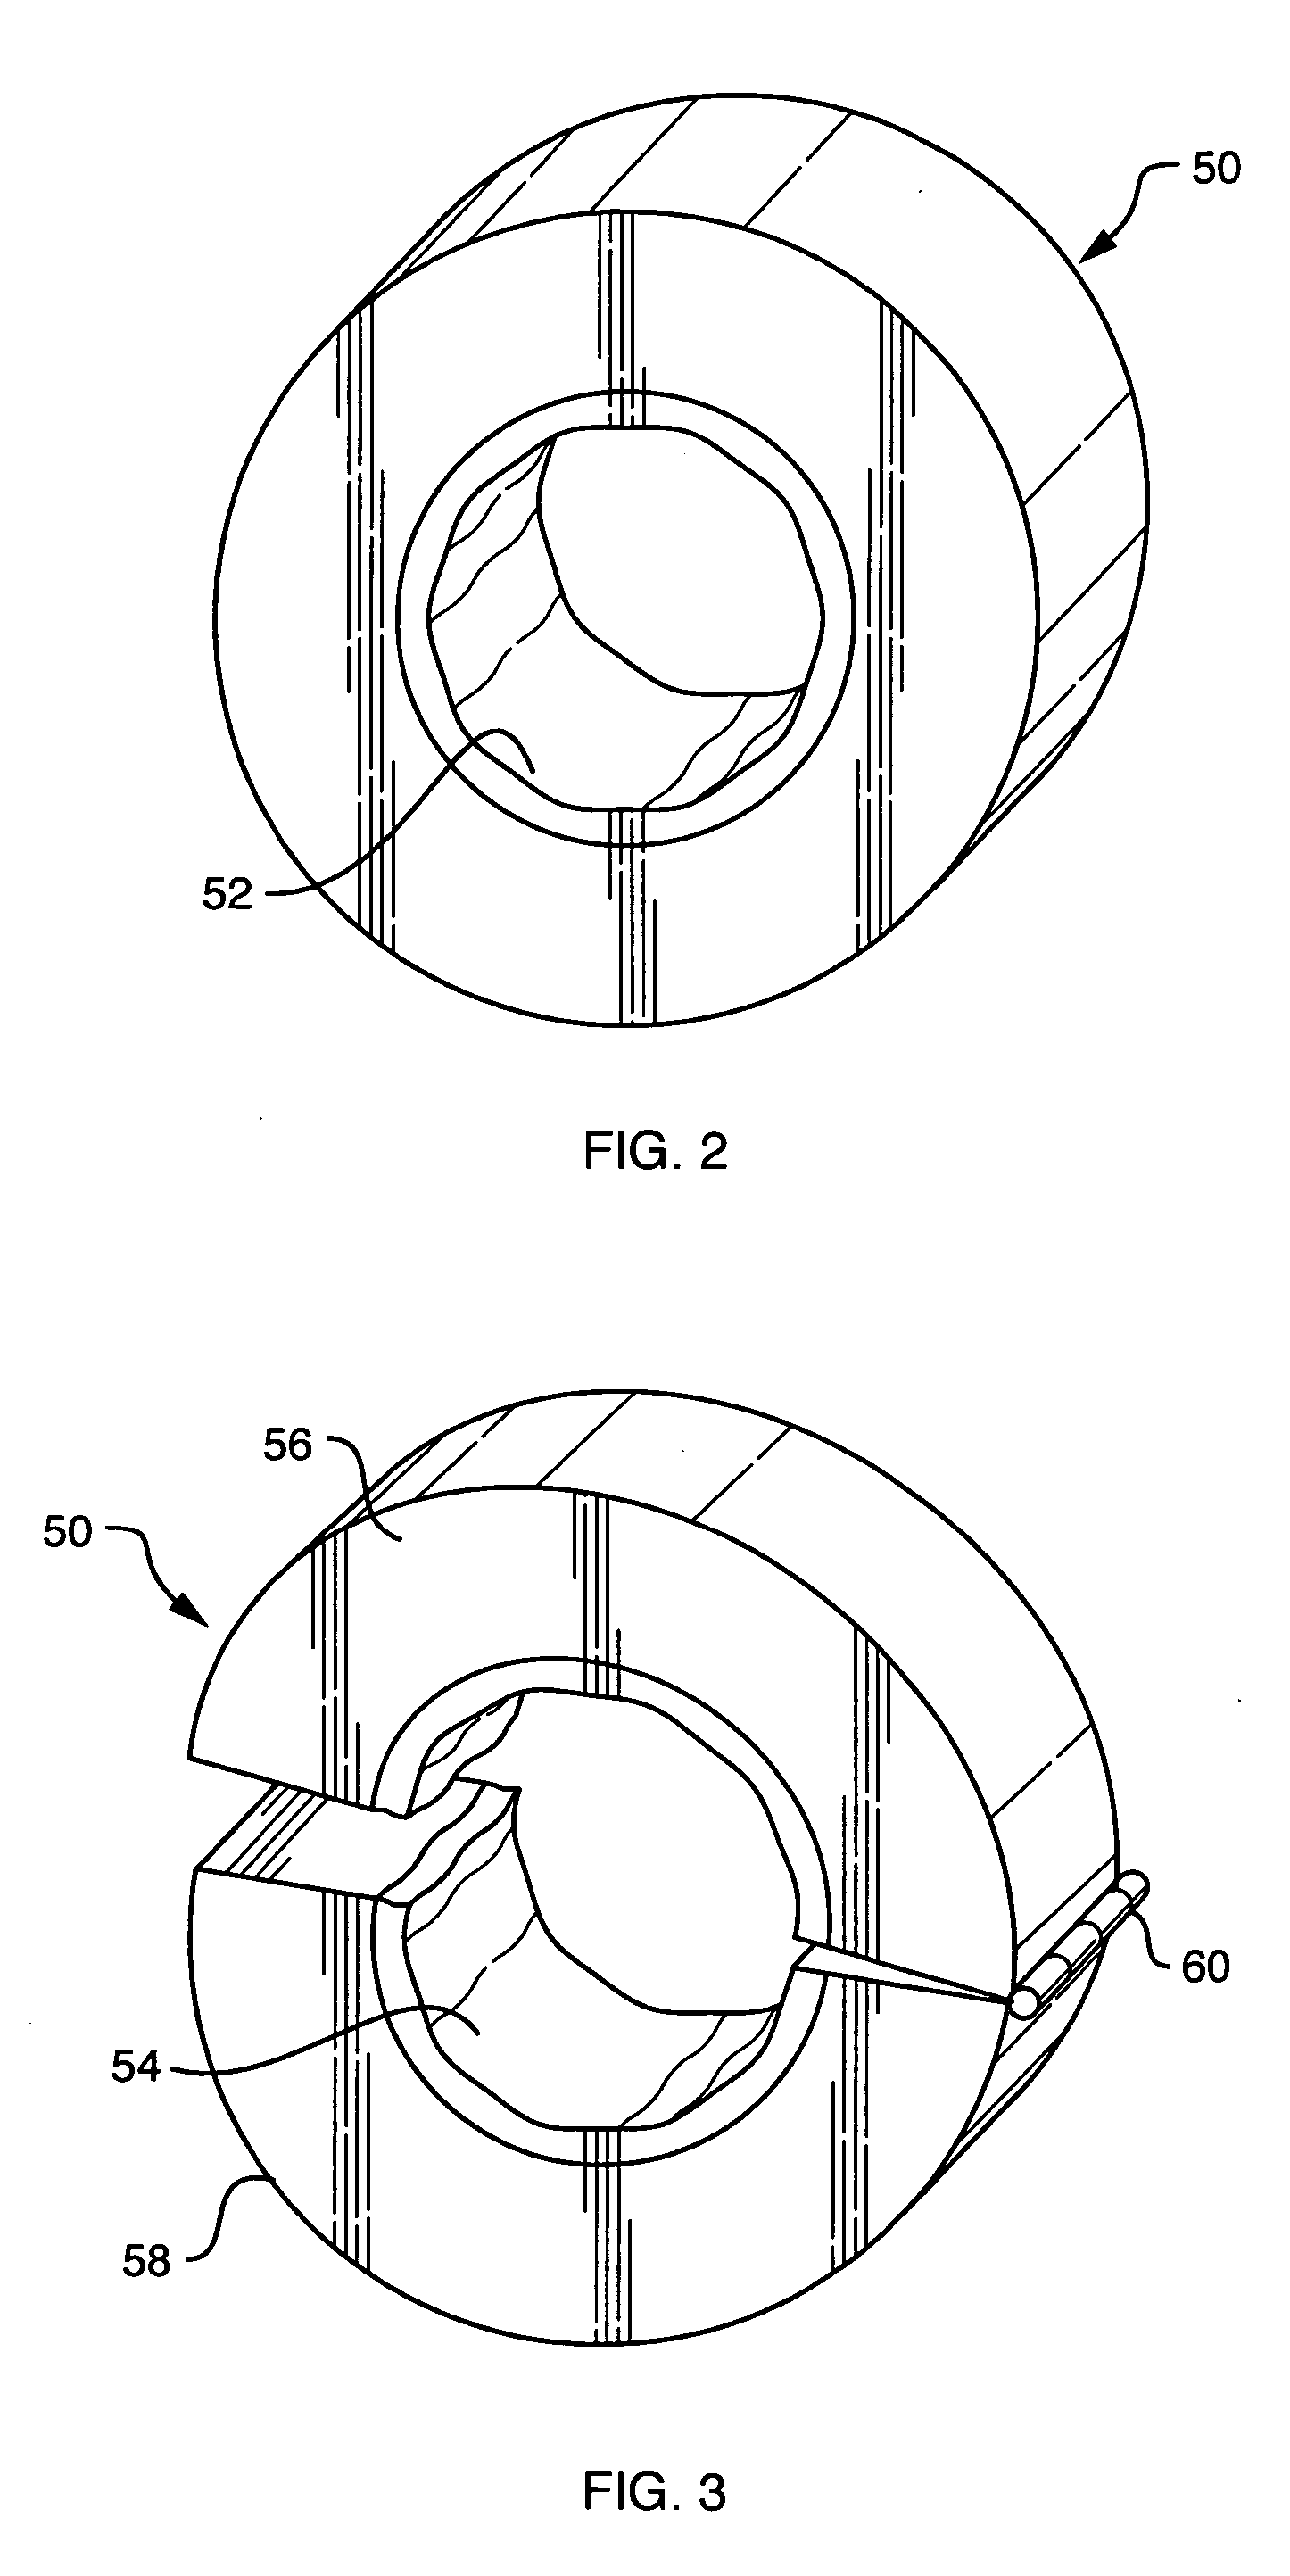 Apparatus for adjustable bead retention on bracelets and necklaces